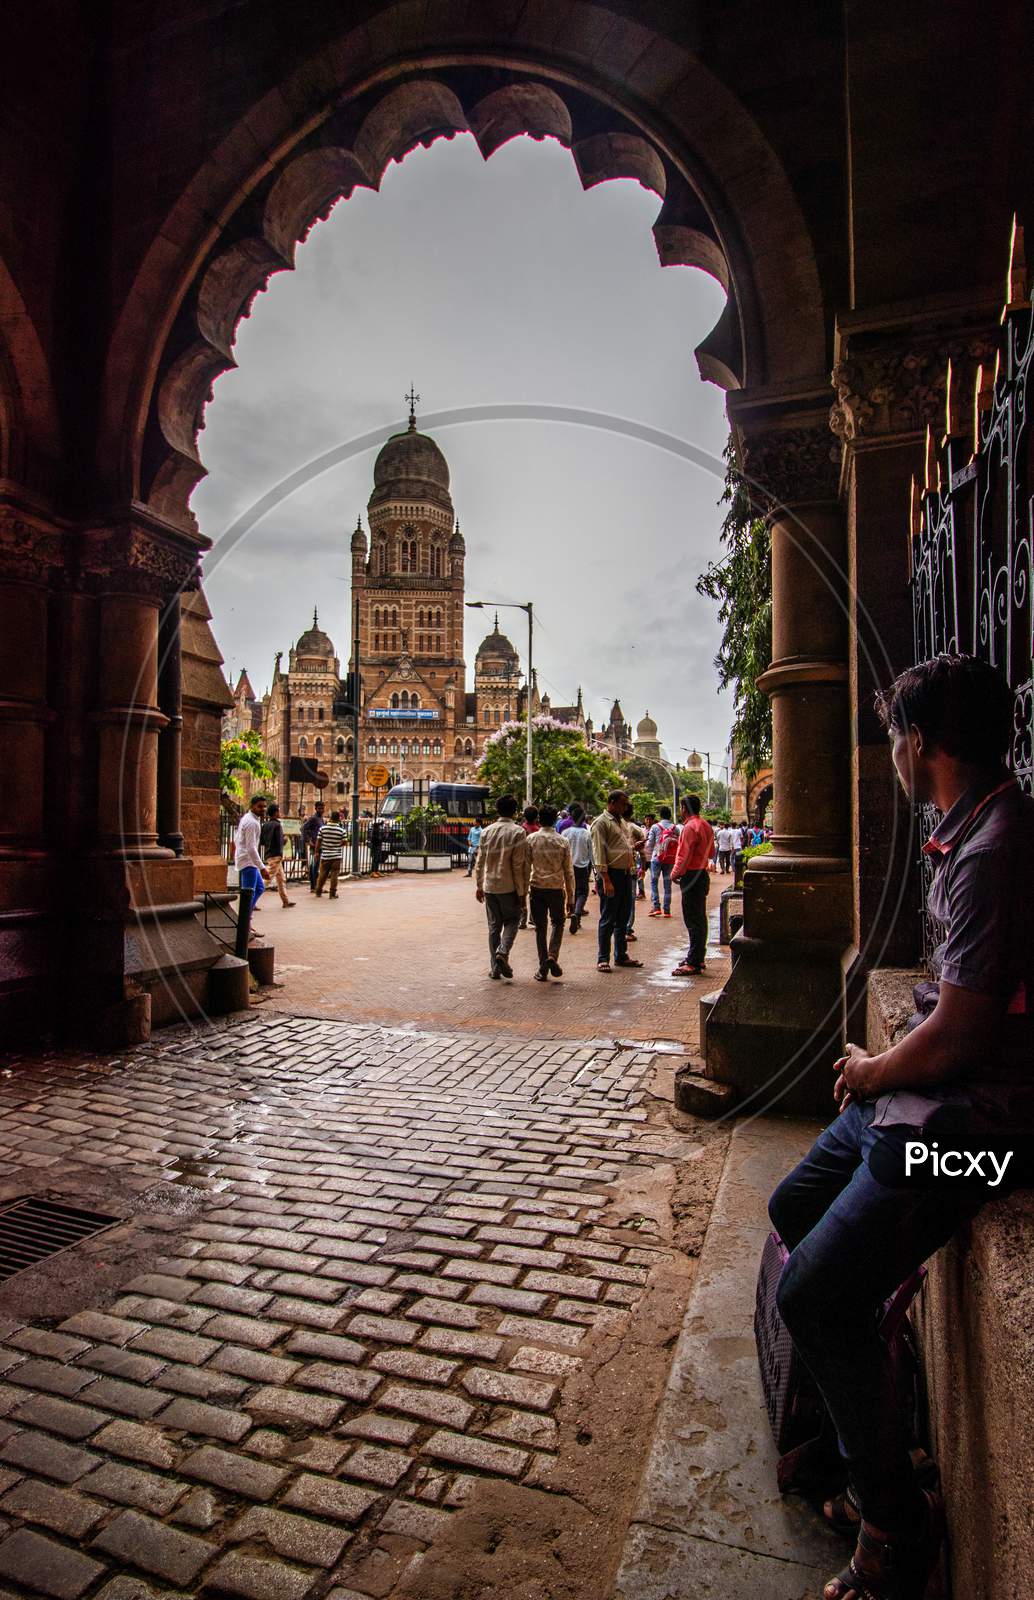 A Pedestrian Looking At Greater Bombay Municipal Corporation (BMC) Building